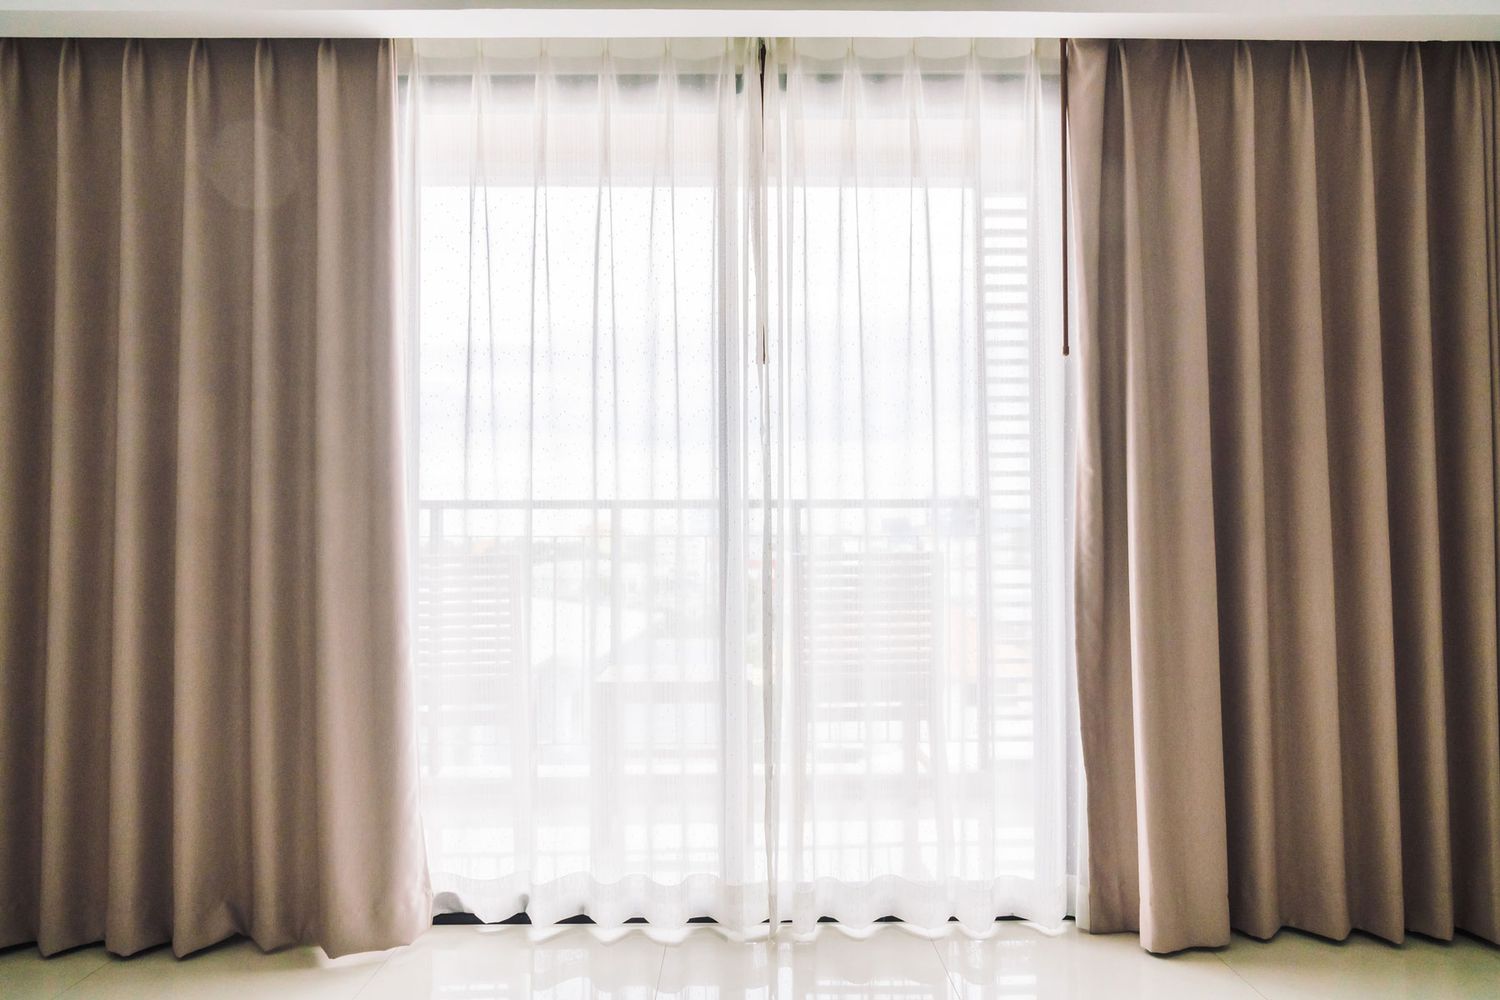 What Length Do Curtains Come In